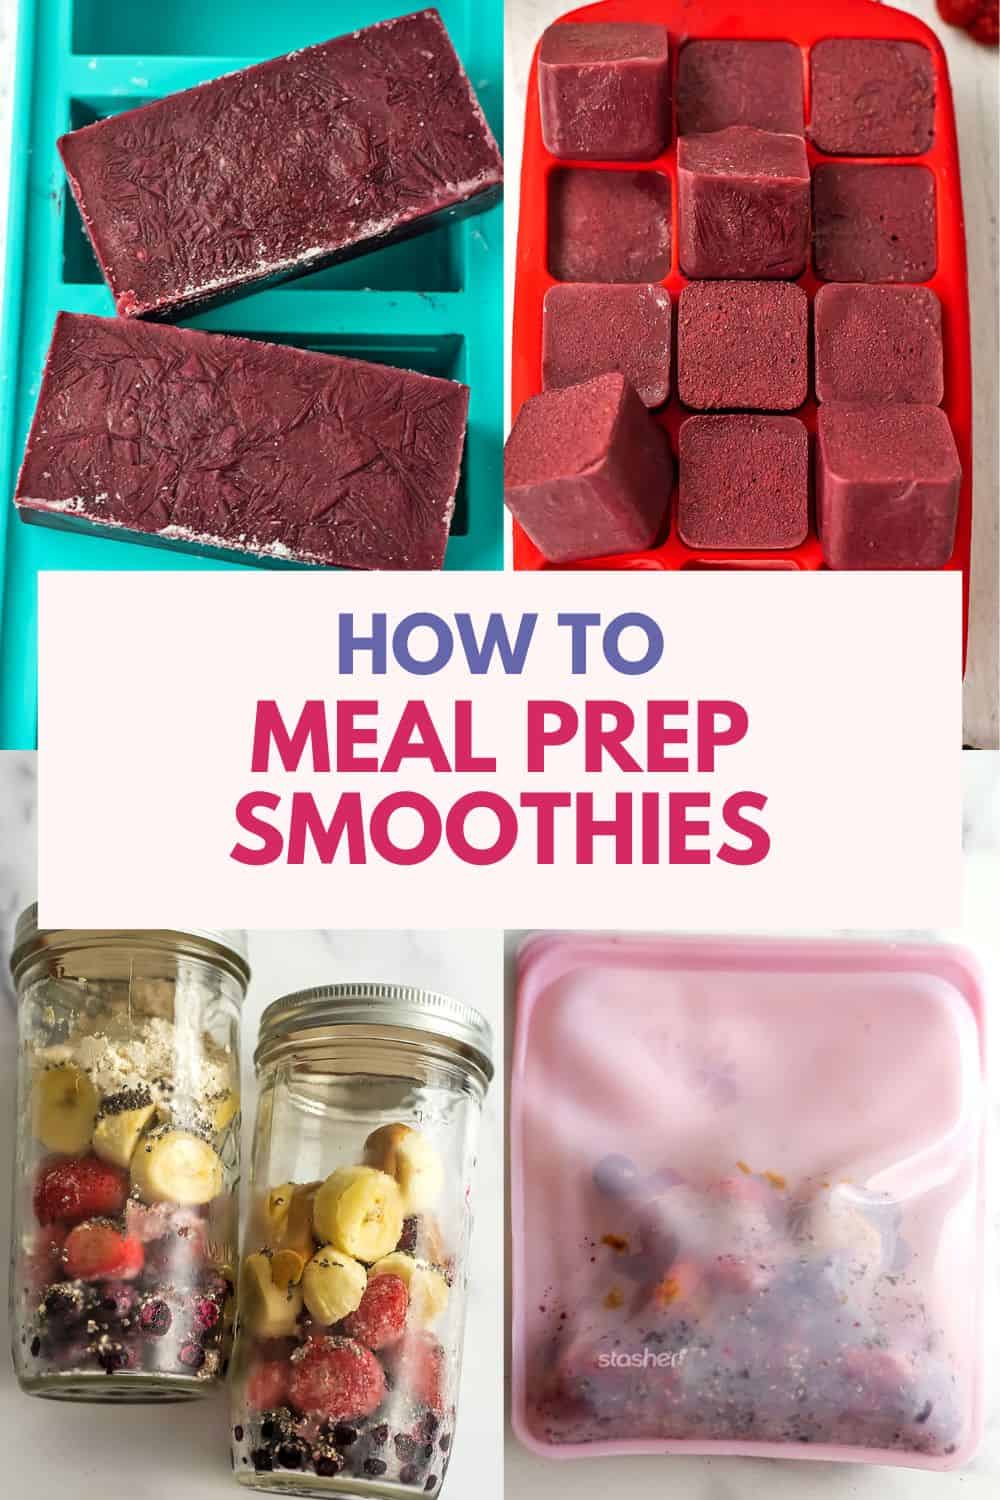 3 Ways You Can Meal Prep Smoothies